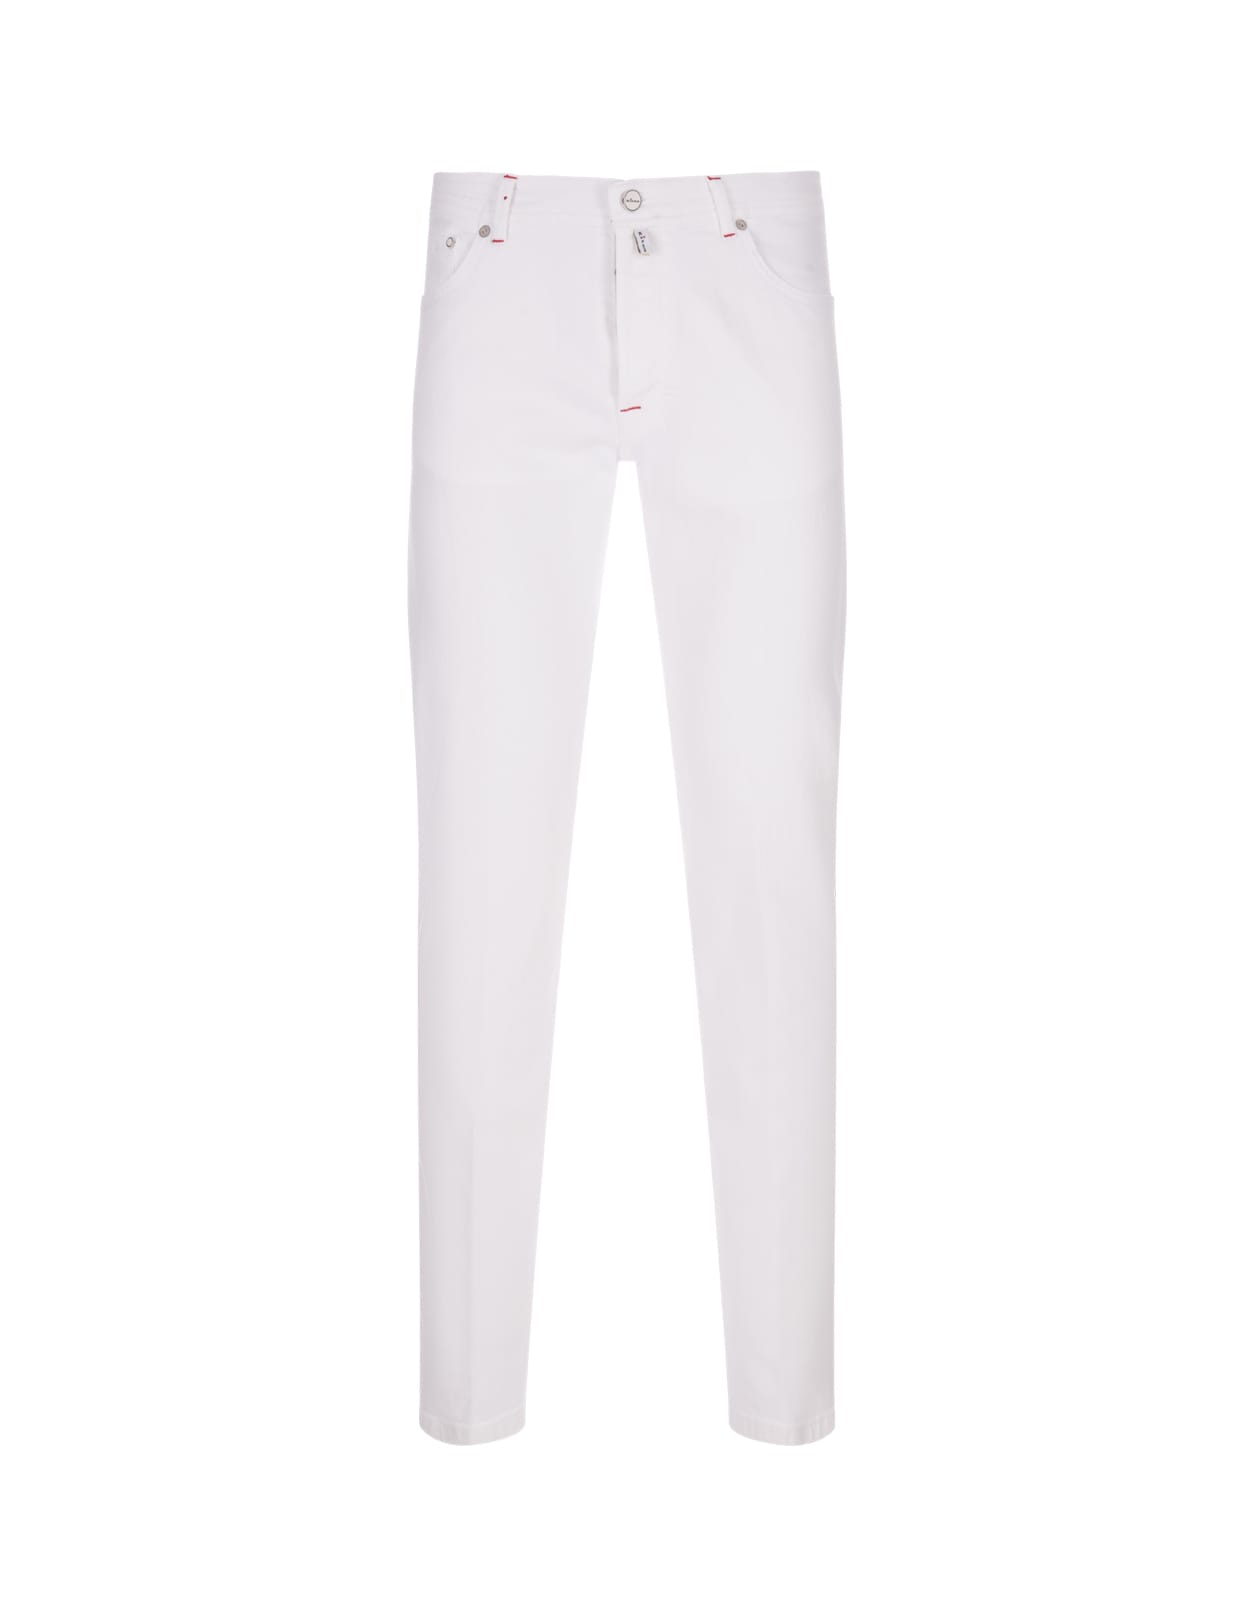 KITON FIVE POCKET TROUSERS IN WHITE